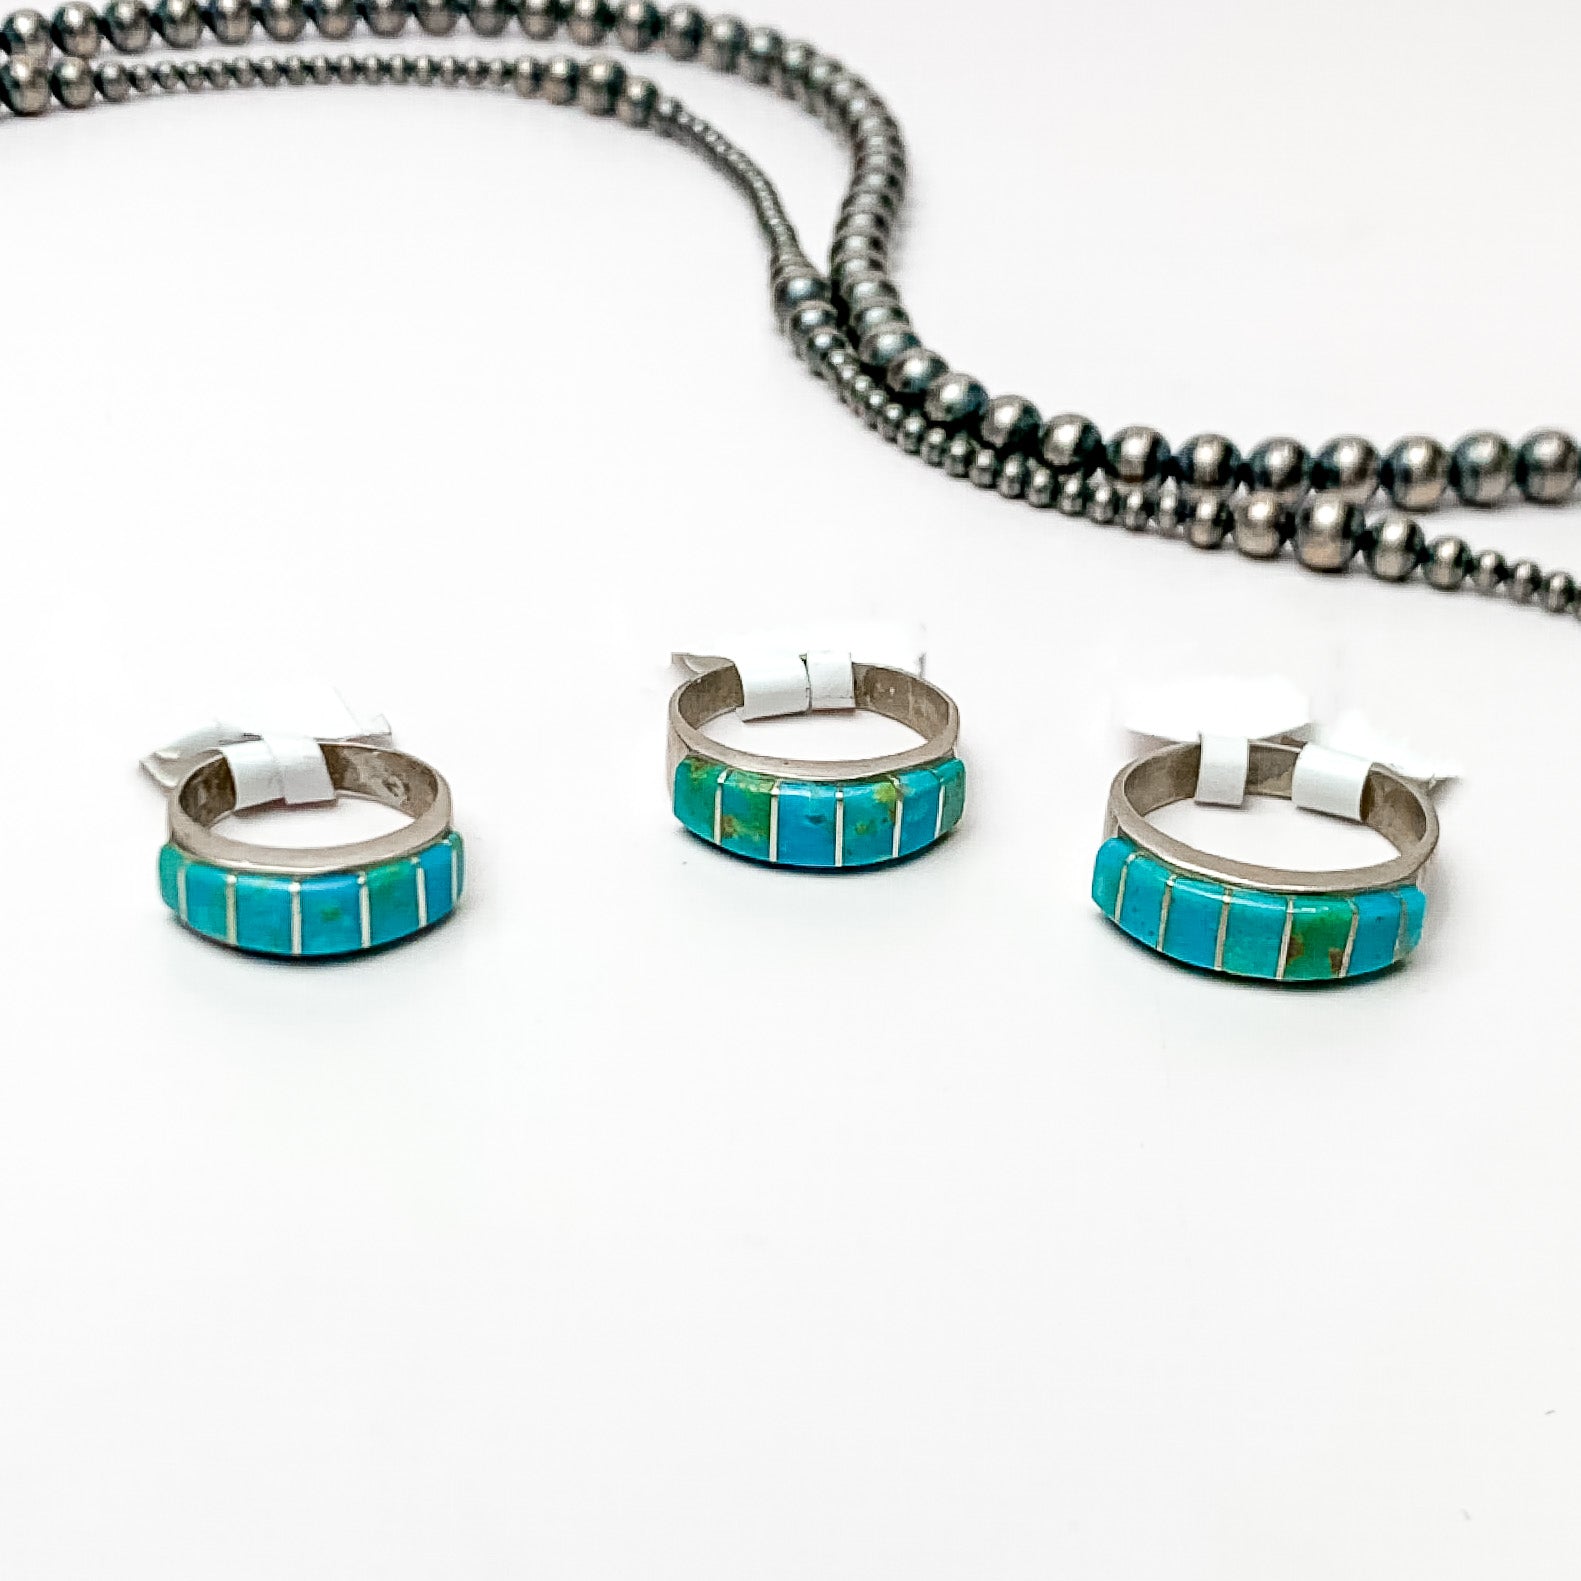 Three silver rings with green turquoise stones pictured on a white background with silver beads. 